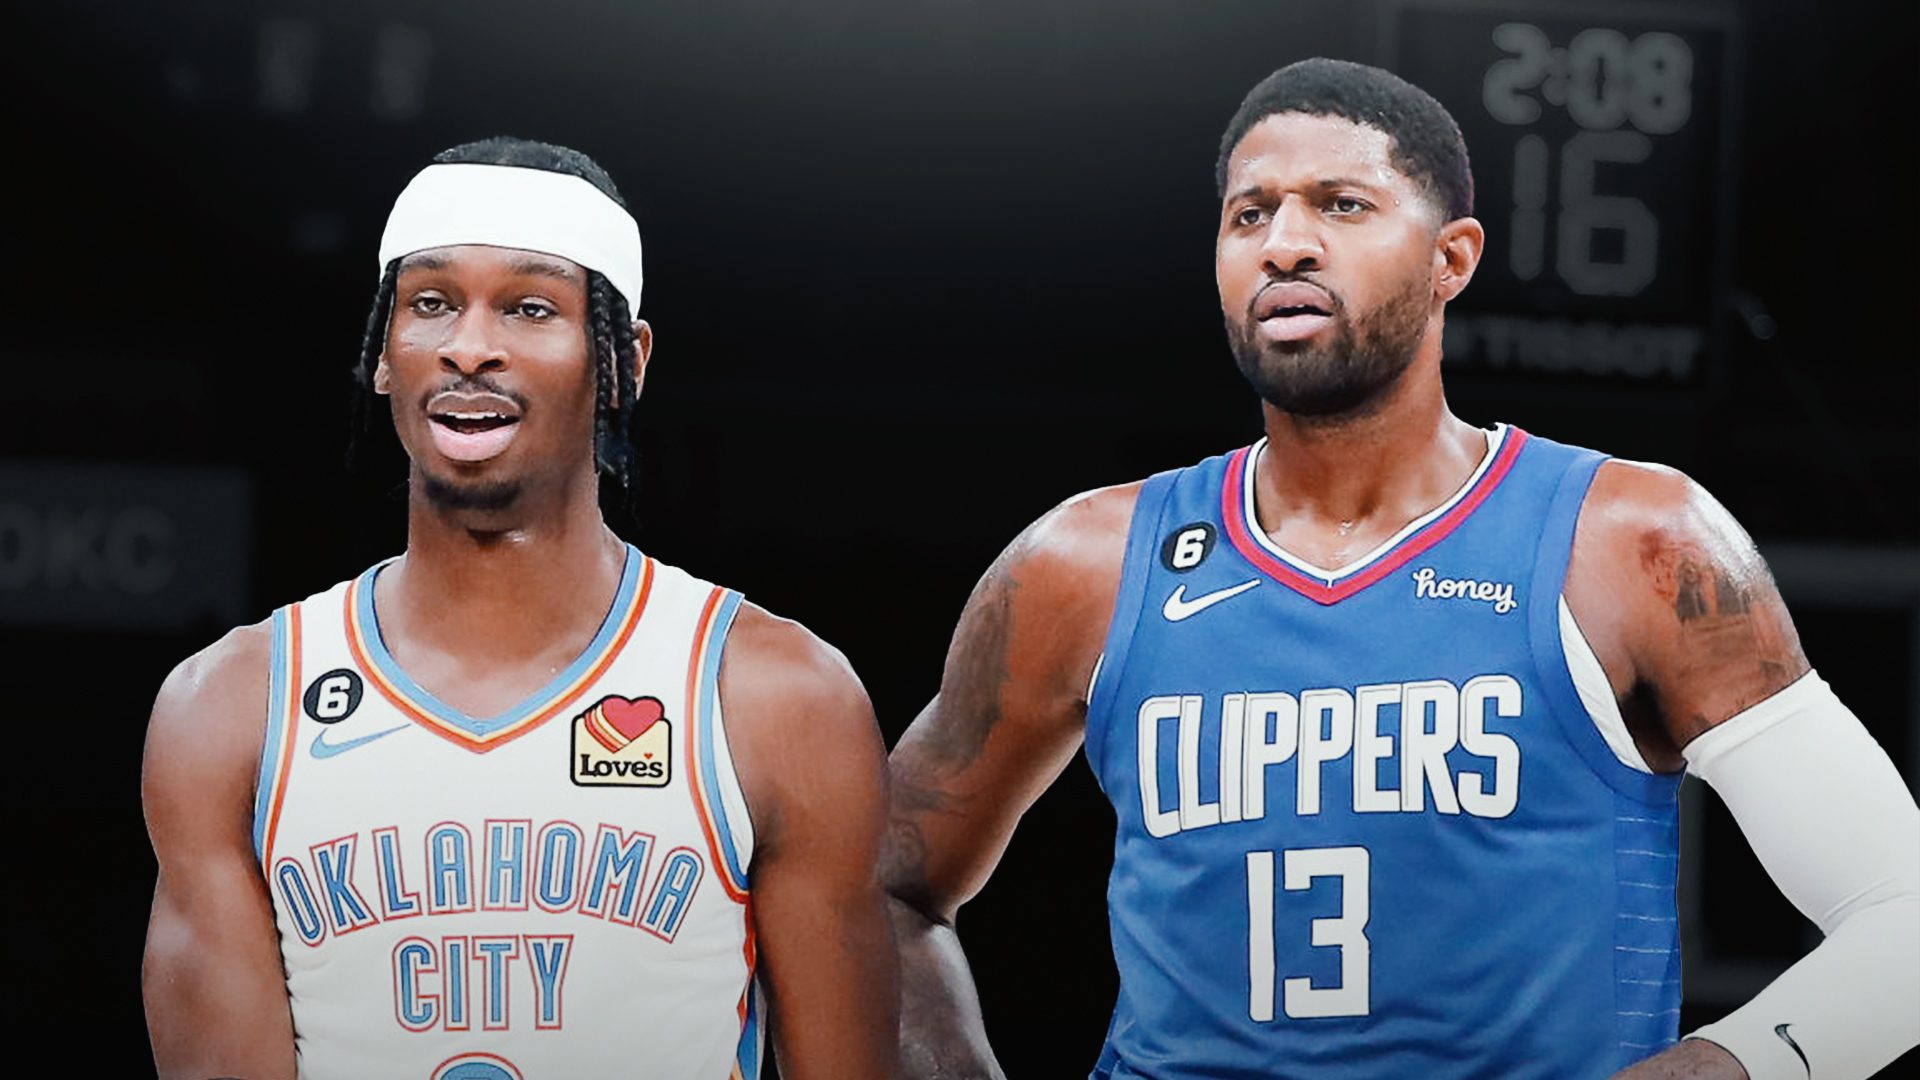 Doc Rivers Was ‘Not So Sure’ About Trading Shai Gilgeous-Alexander for Paul George